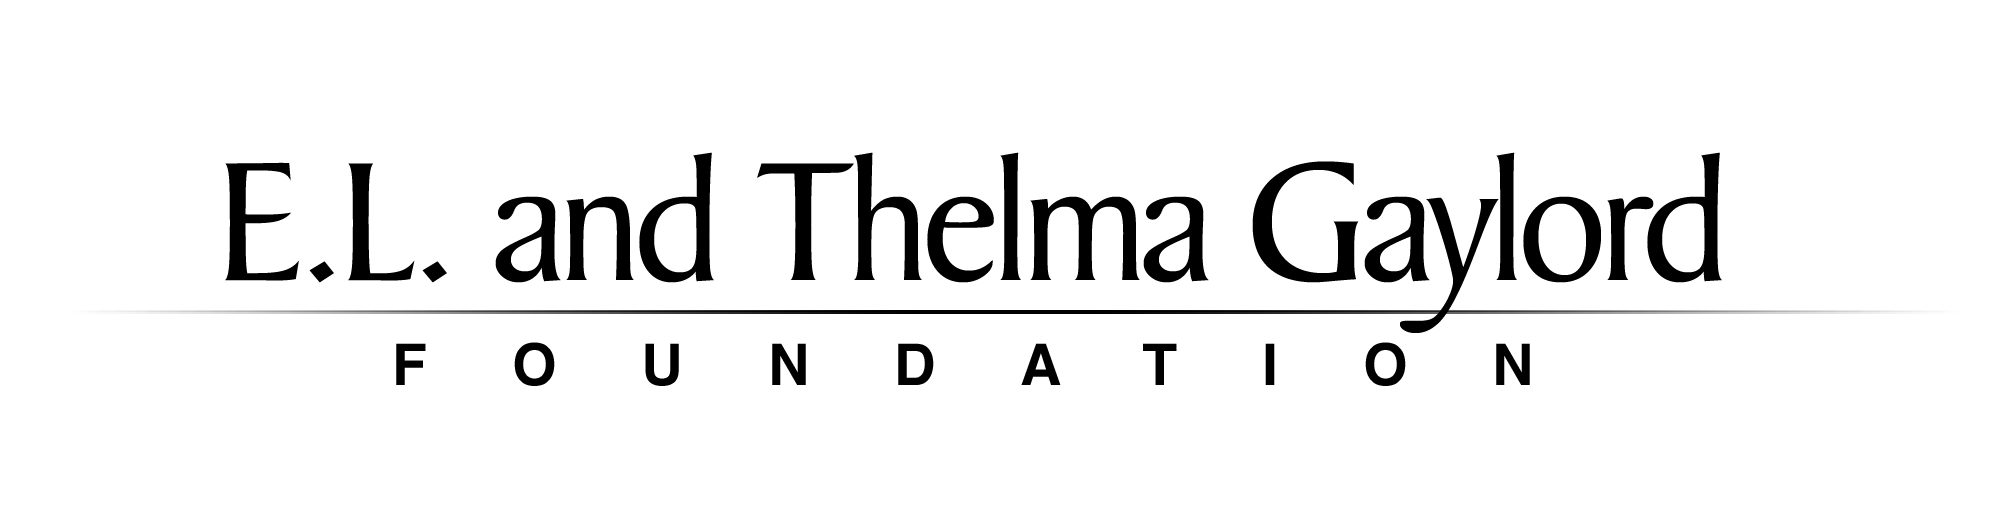 The E. L. and Thelma Gaylord Foundation